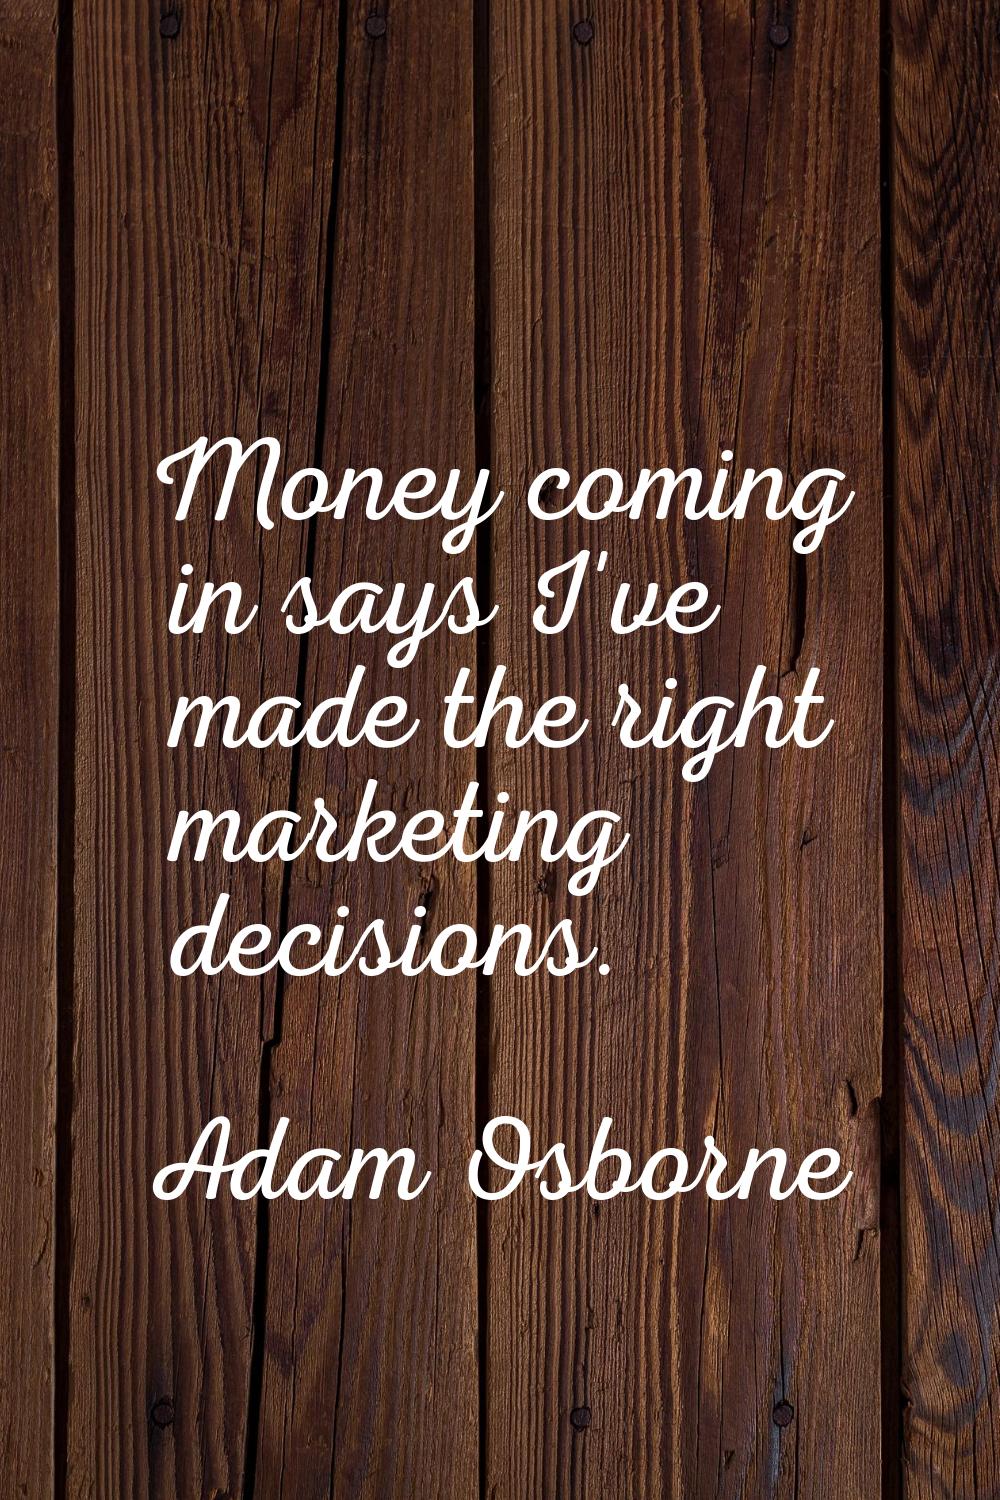 Money coming in says I've made the right marketing decisions.